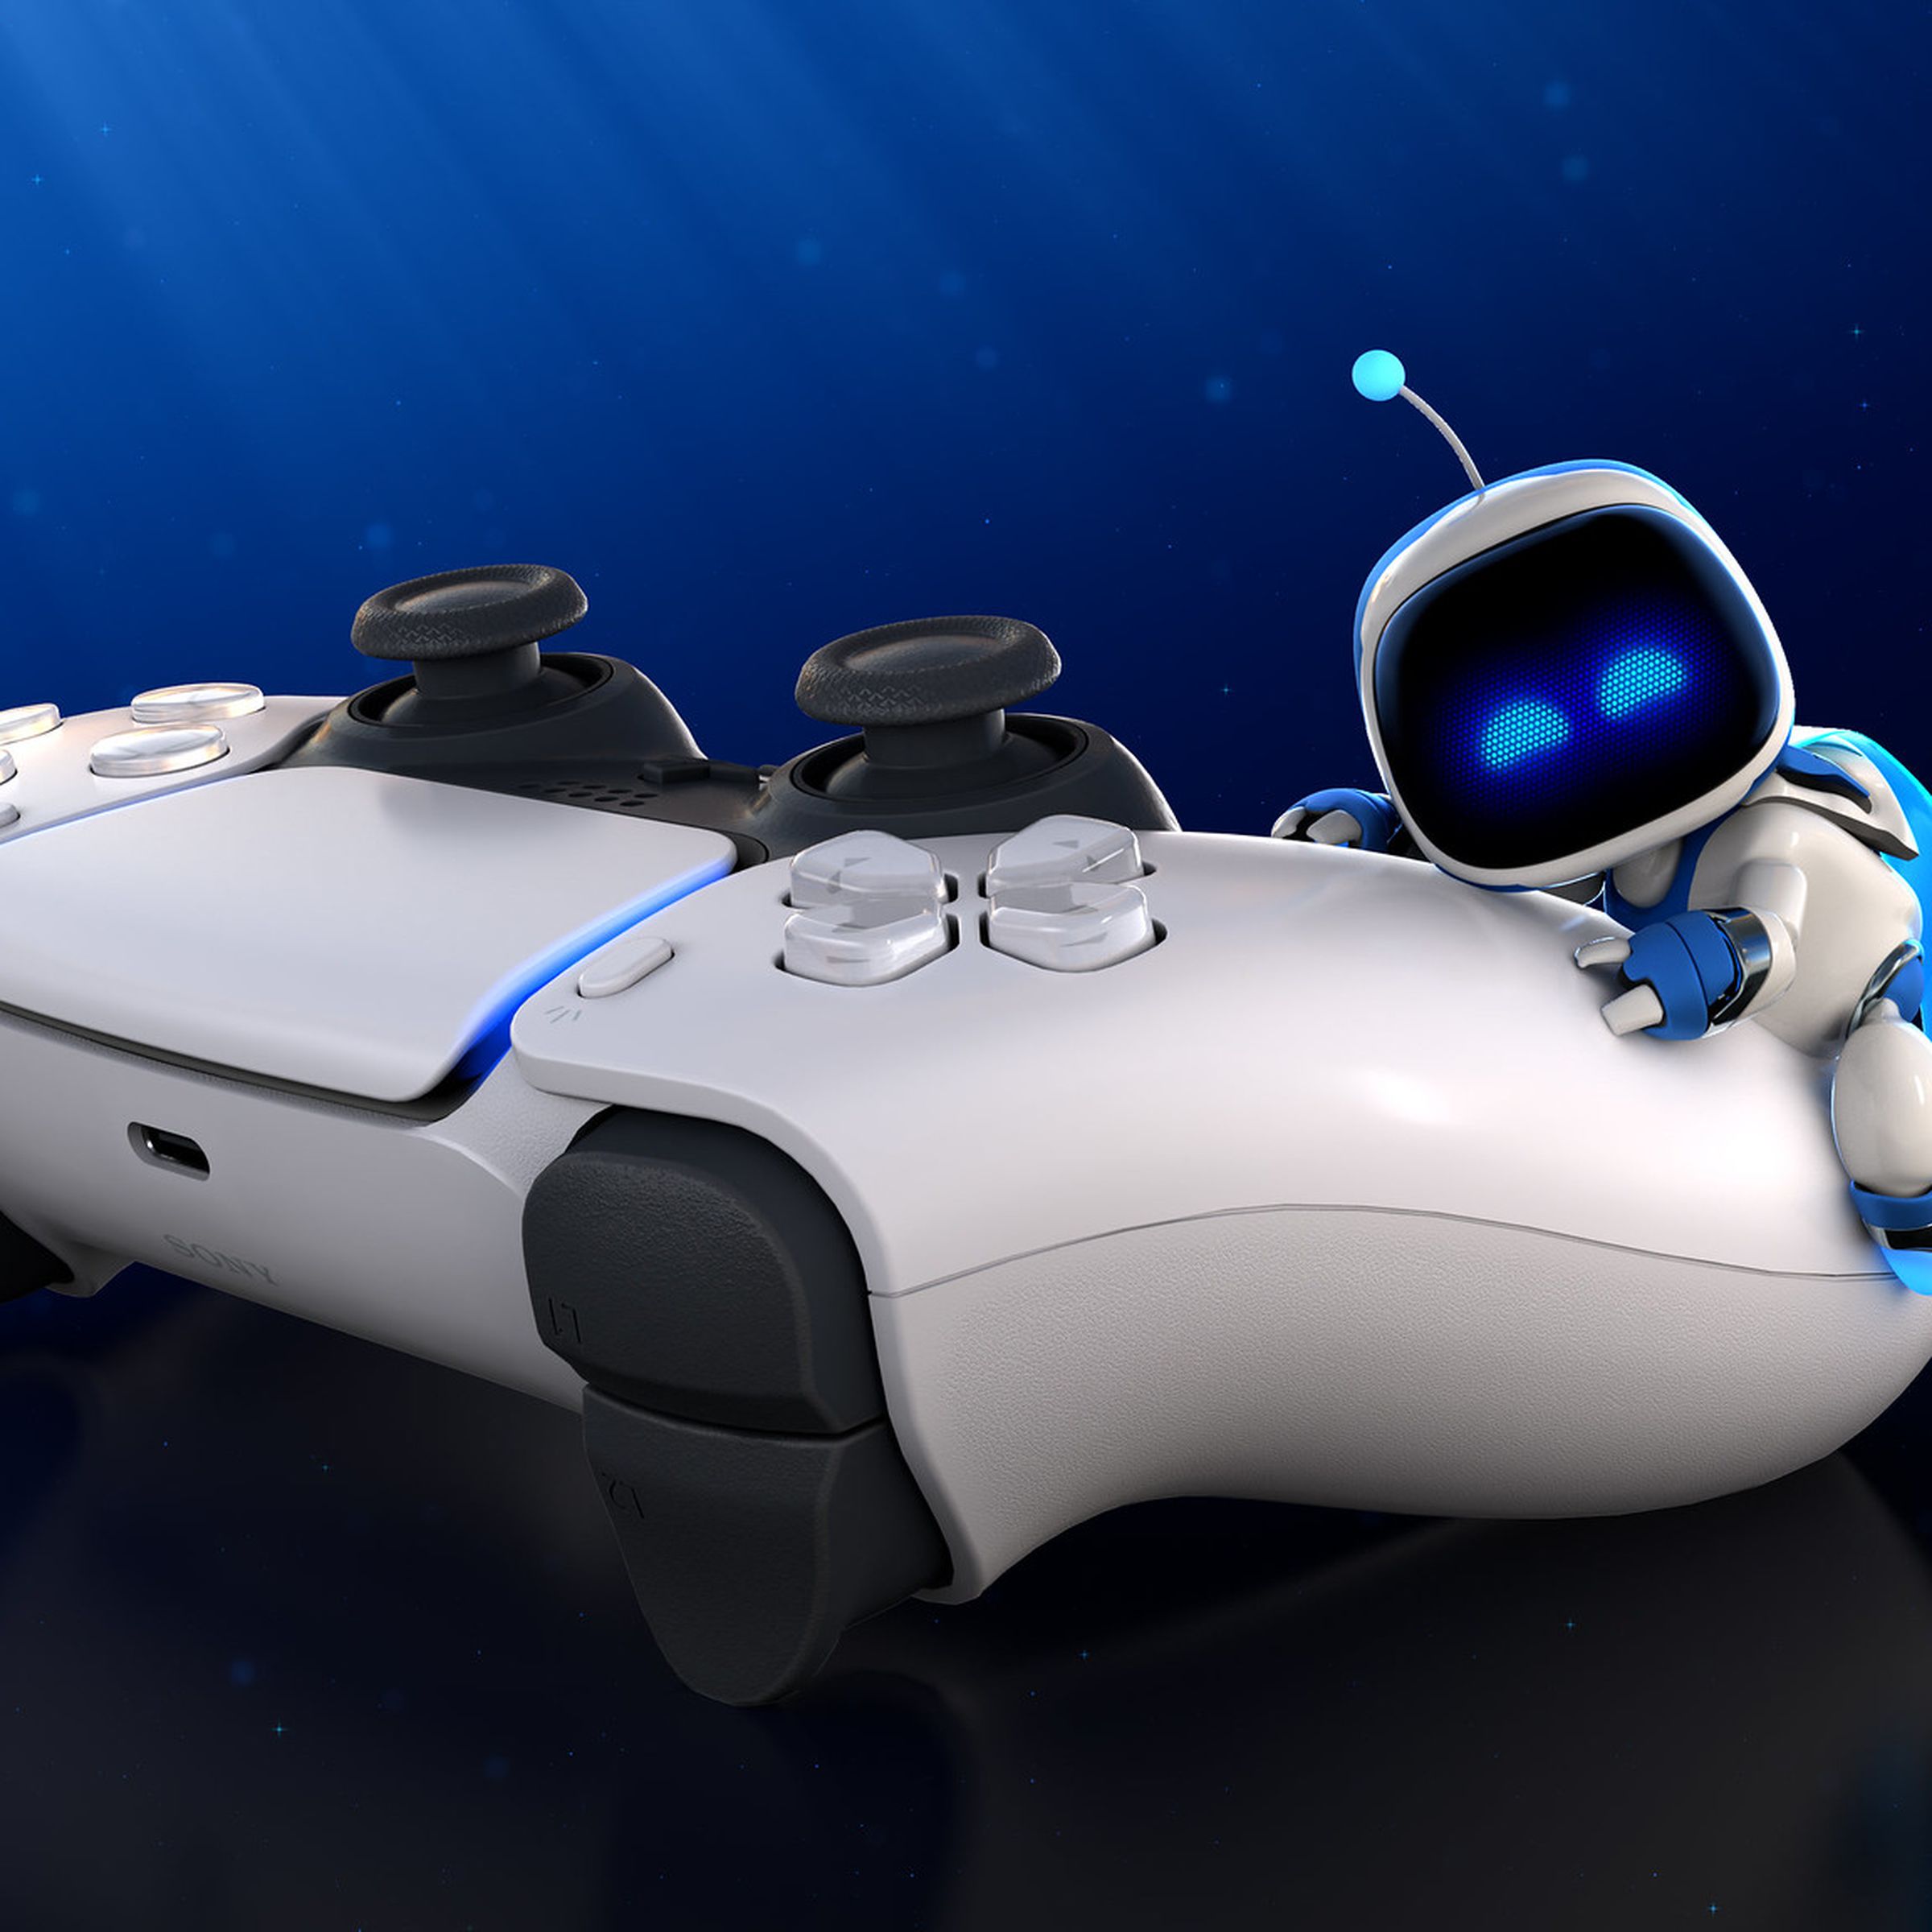 Promotional art featuring Astro Bot and a PS5 DualSense controller.